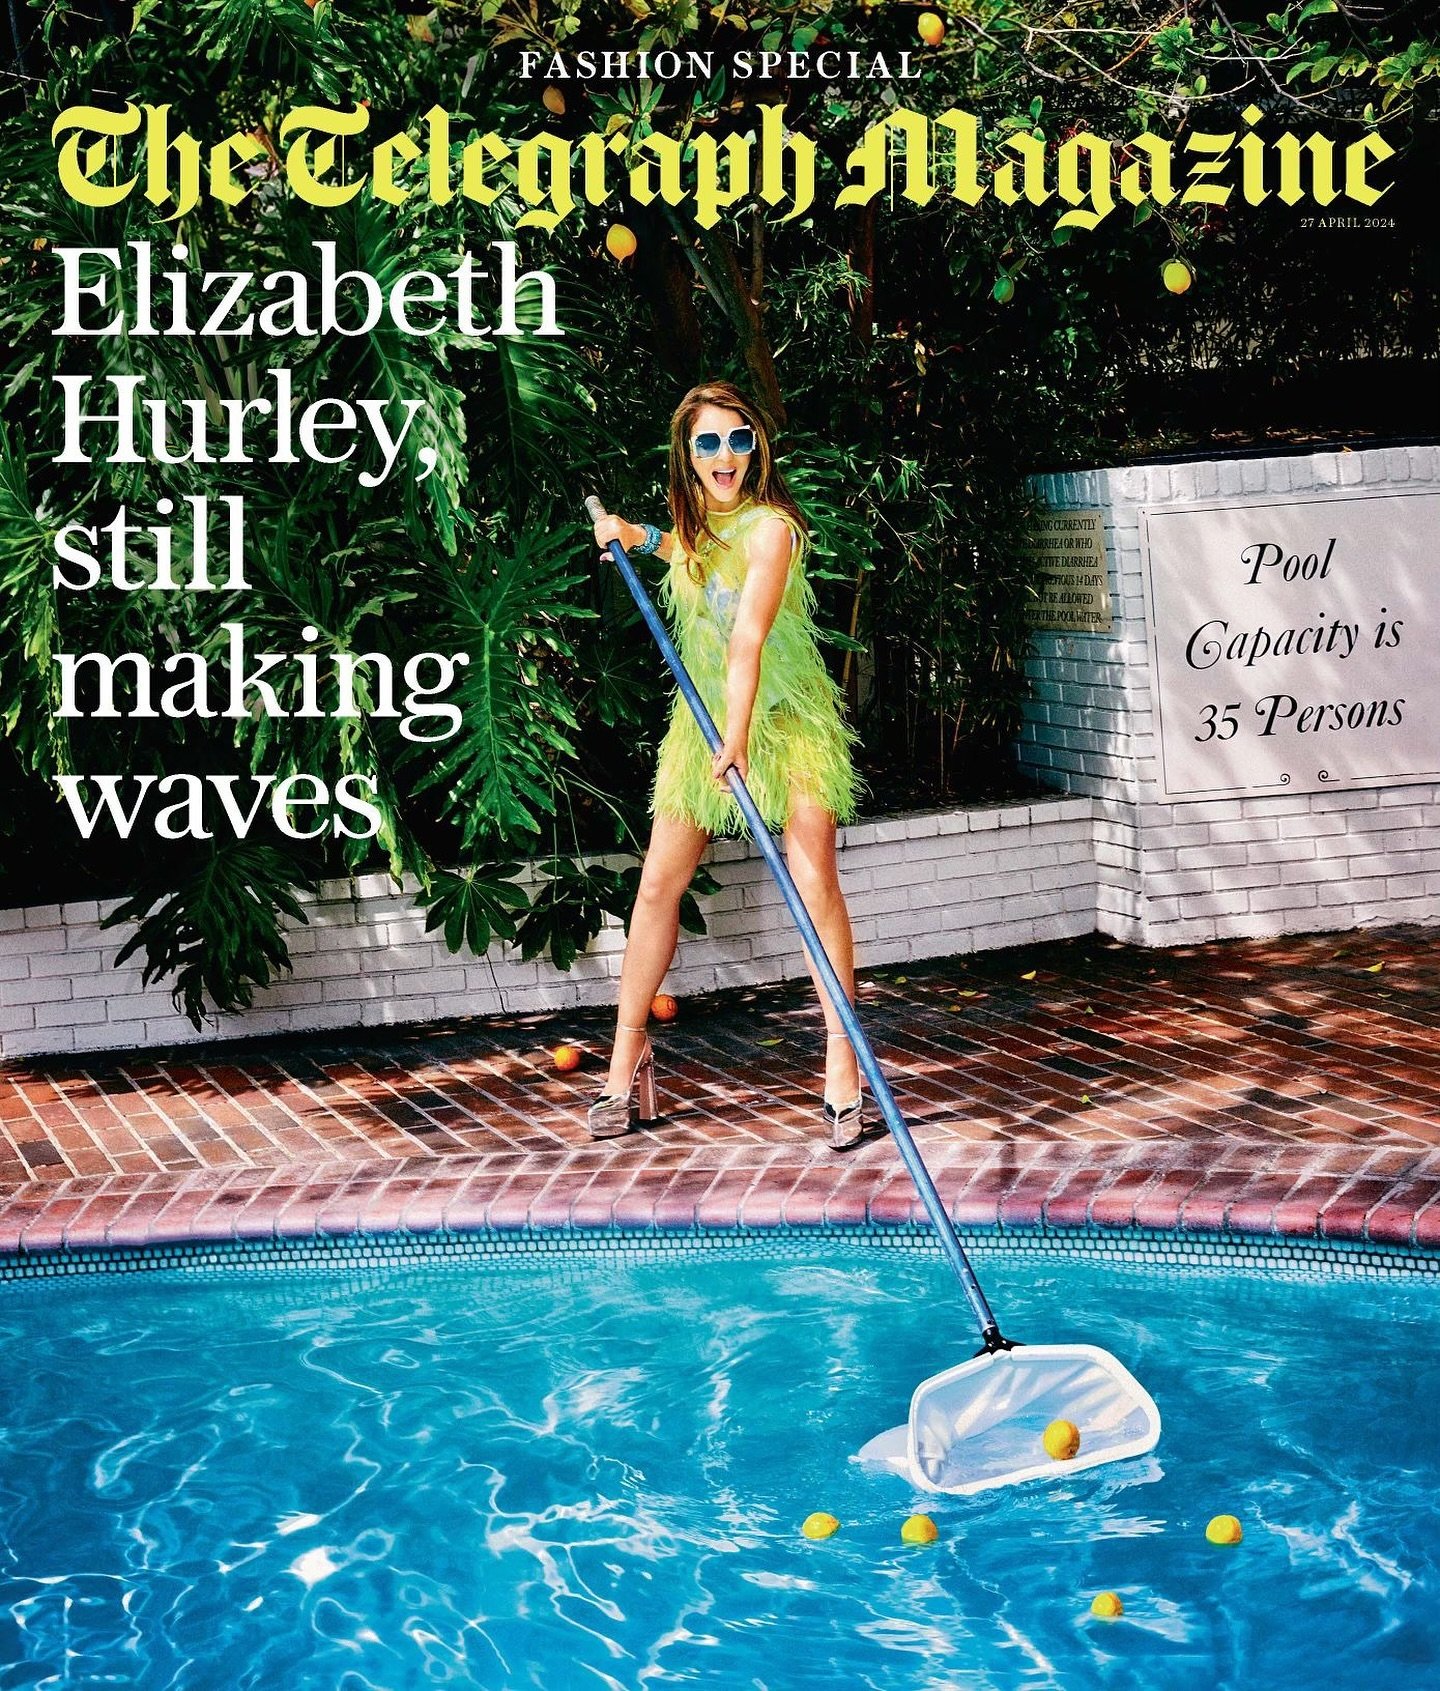 We are delighted to present our VIP magazine coverage of @elizabethhurley1 wearing @desphemmes on the cover of @telegraph Magazine accross the weekend. 

Styling by @stylistmikeadler 

Photographed by @ellenvonunwerth 

#LDR22 #LucioDiRosa #LDR22Mila